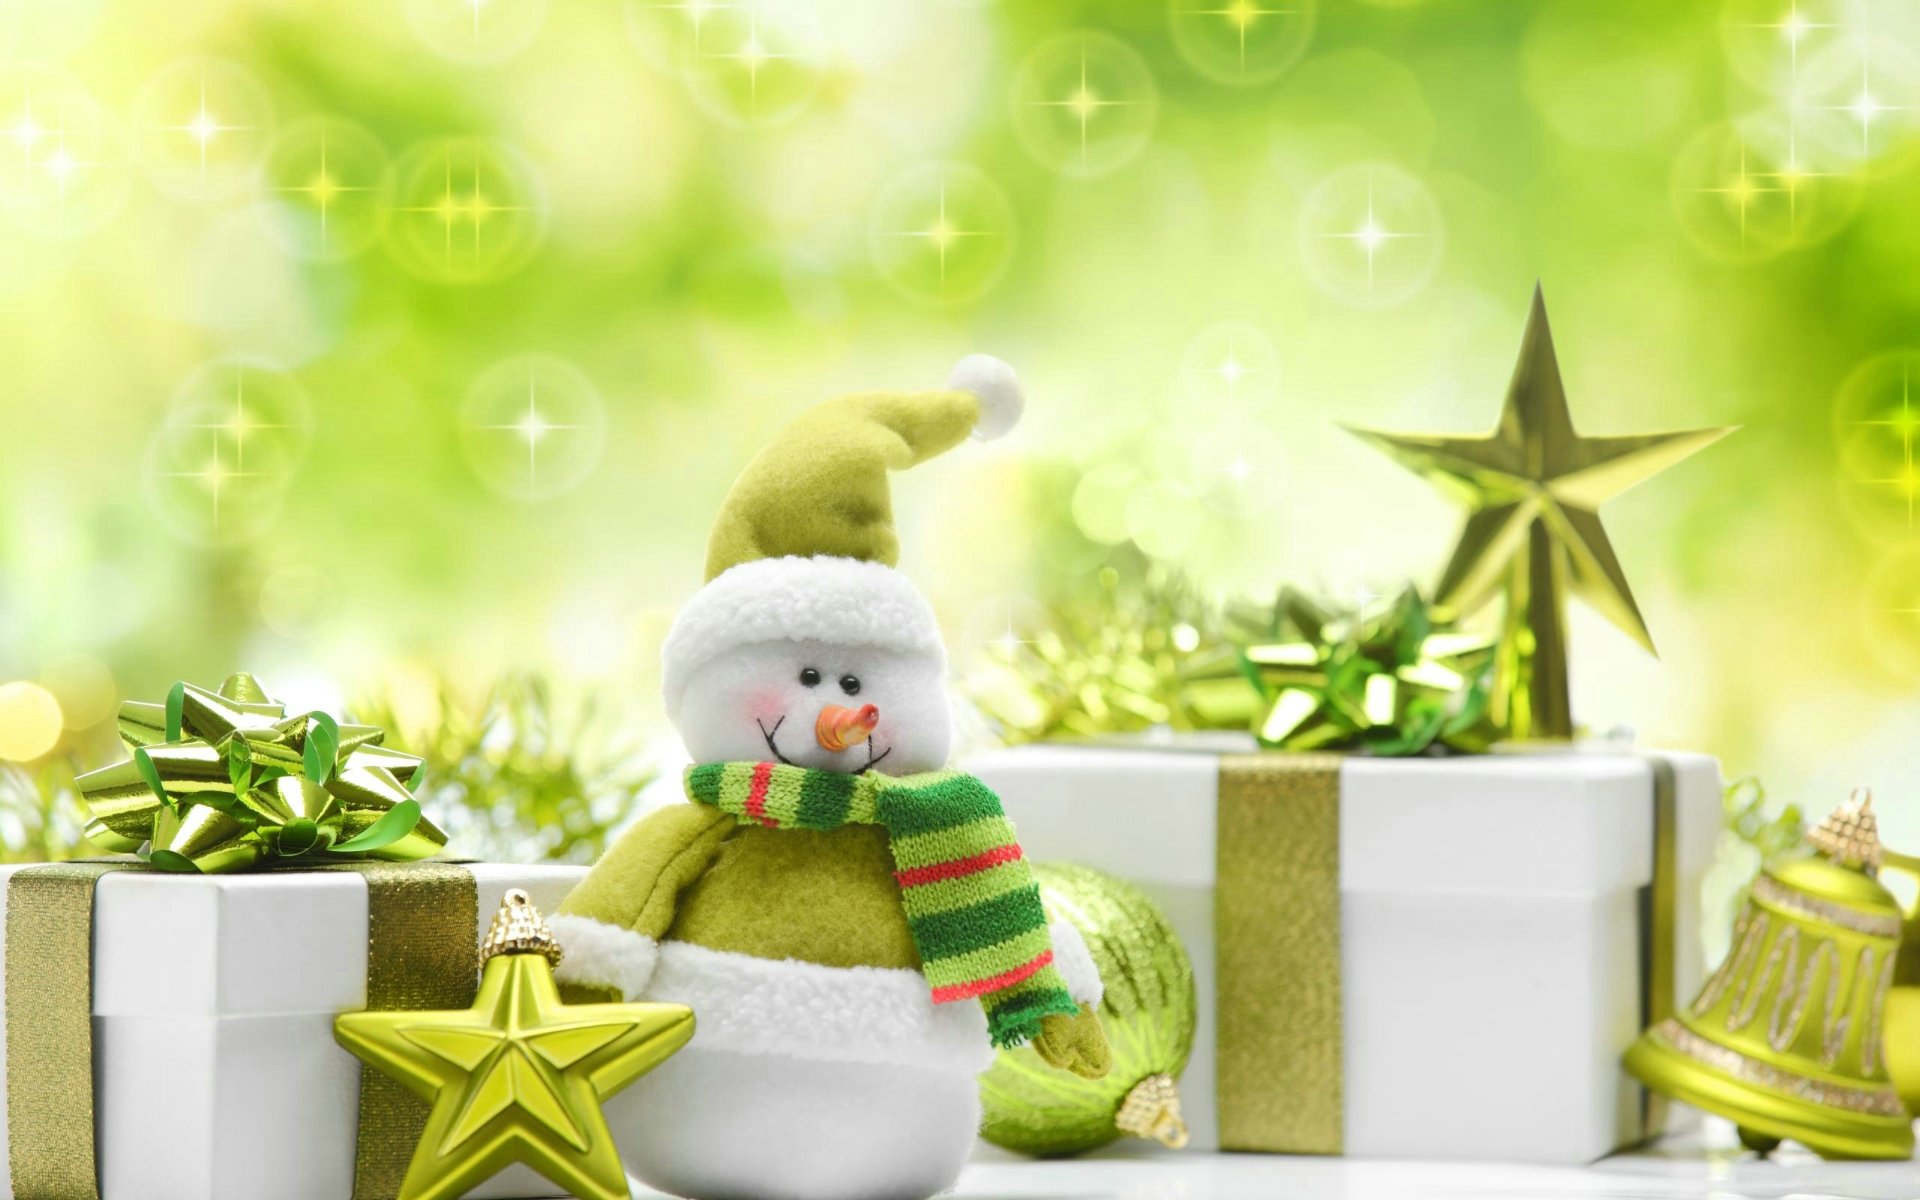 Green Christmas Presents Wallpaper High Definition Quality